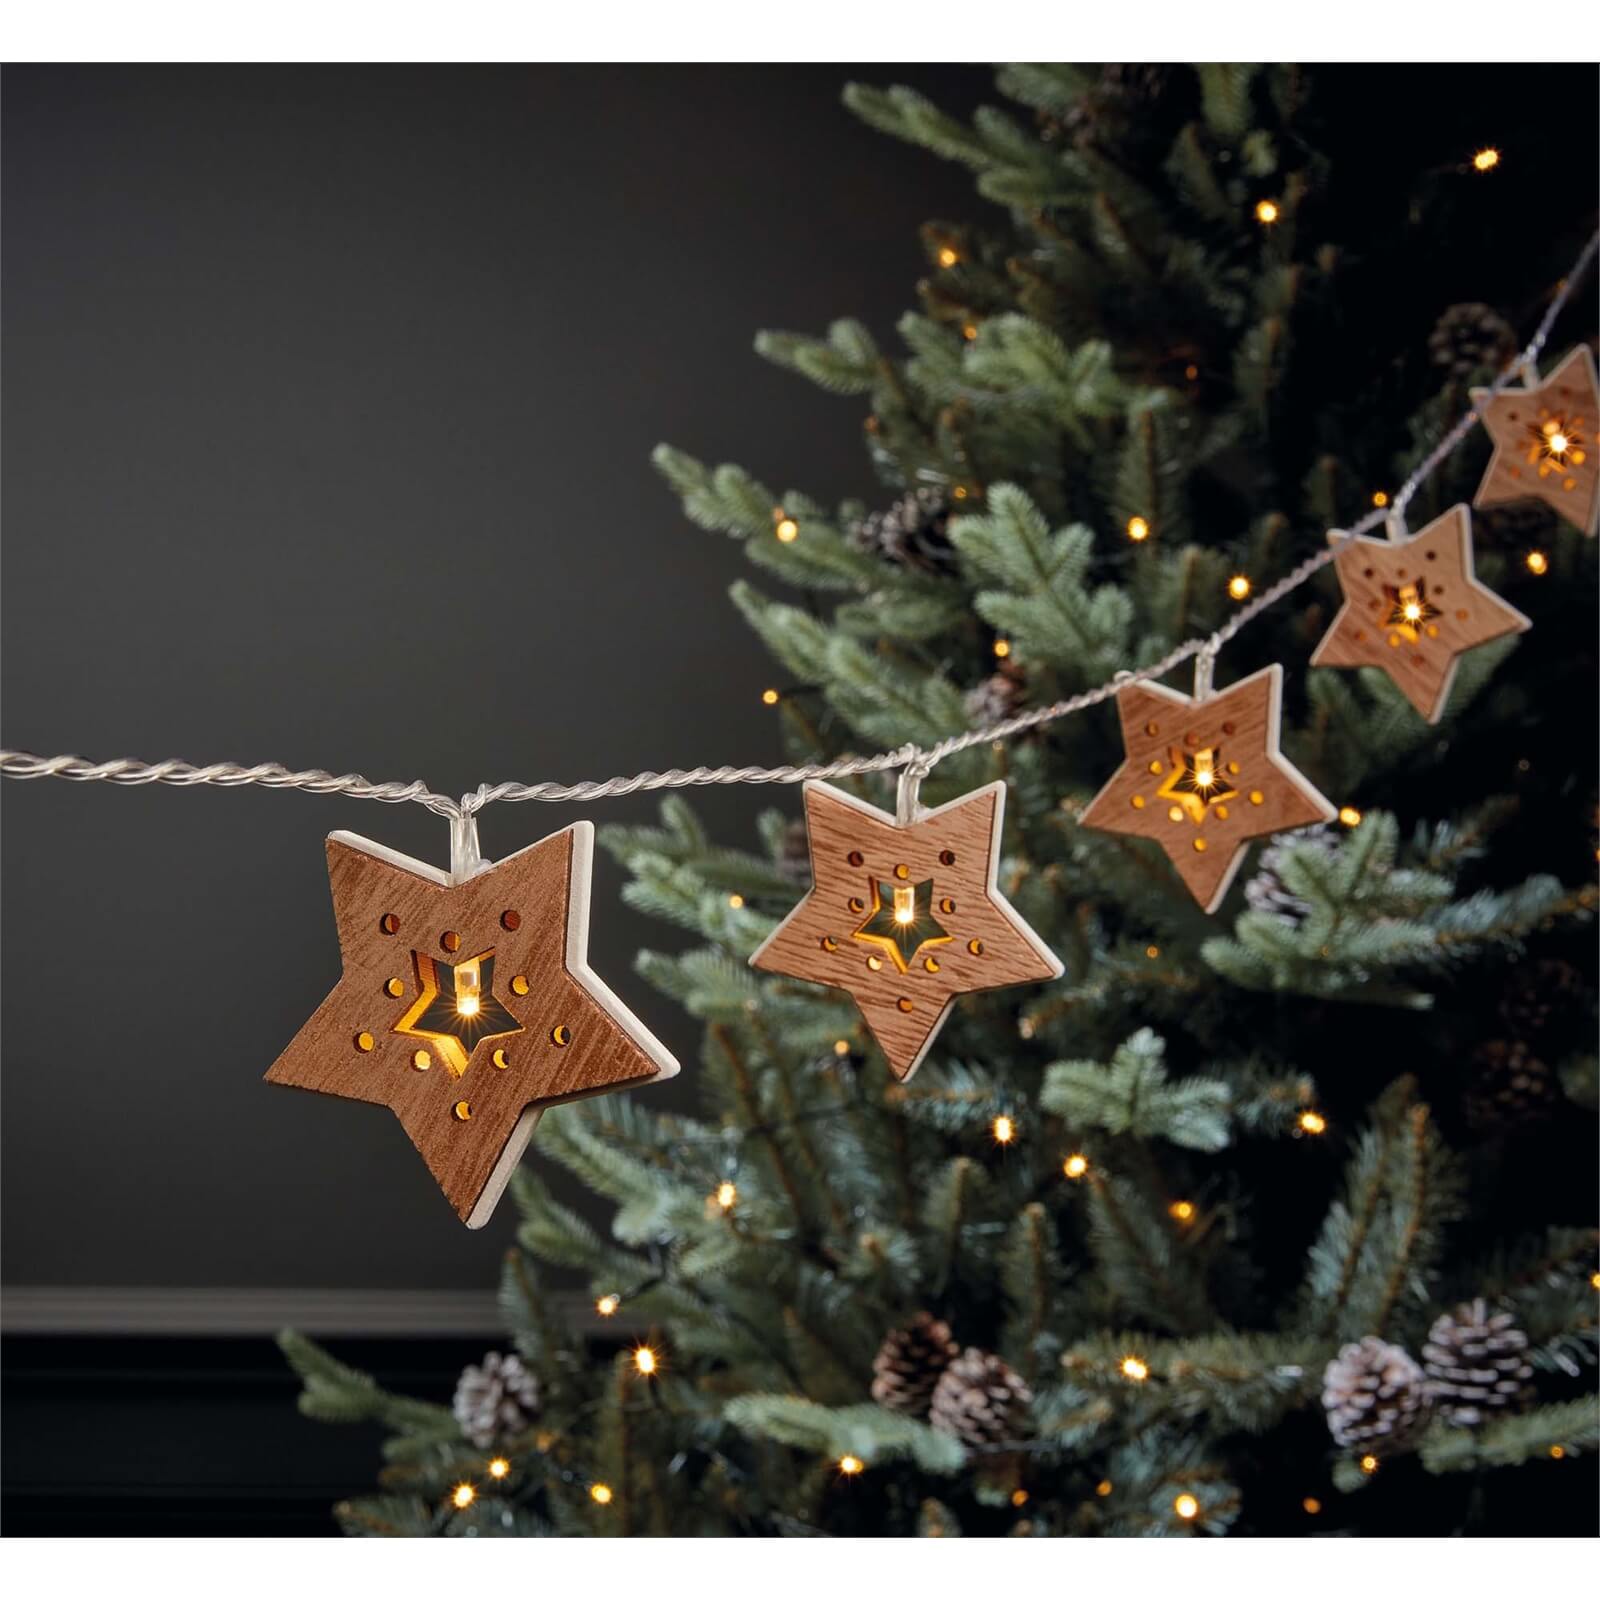 10 Wooden Star Christmas String Lights (Battery Operated)